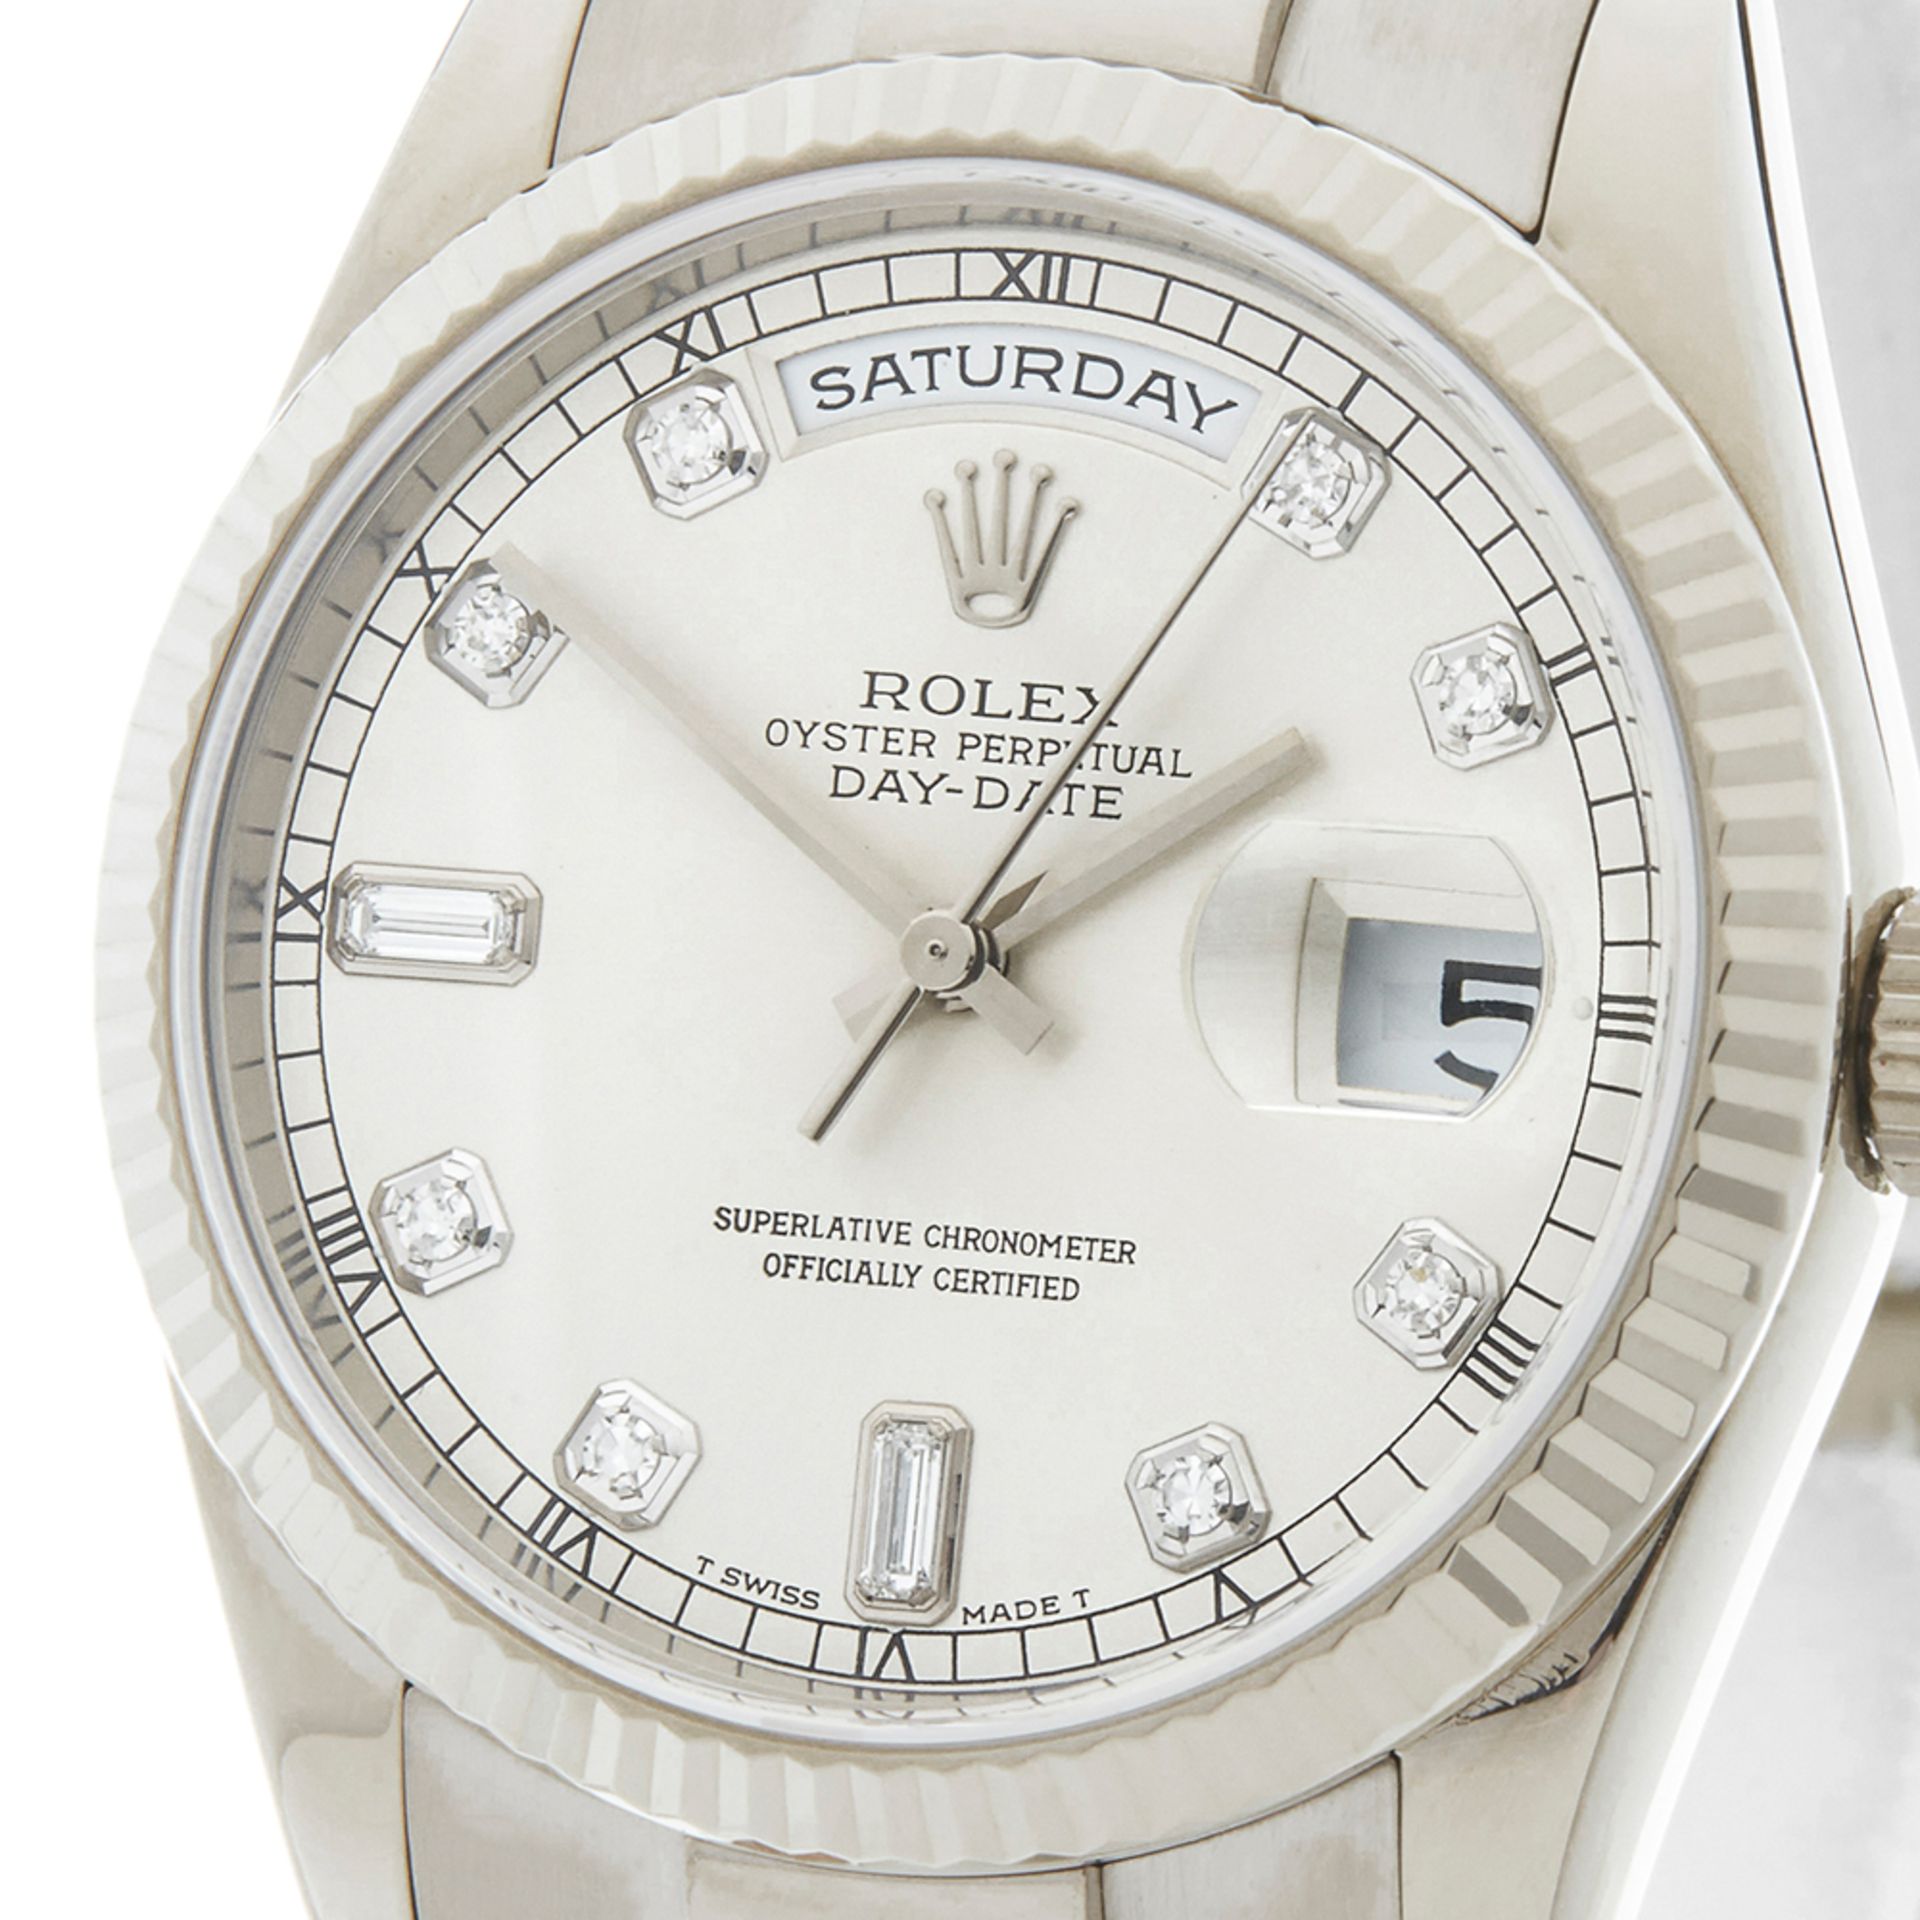 Rolex Day-Date 36mm 18k White Gold 118239